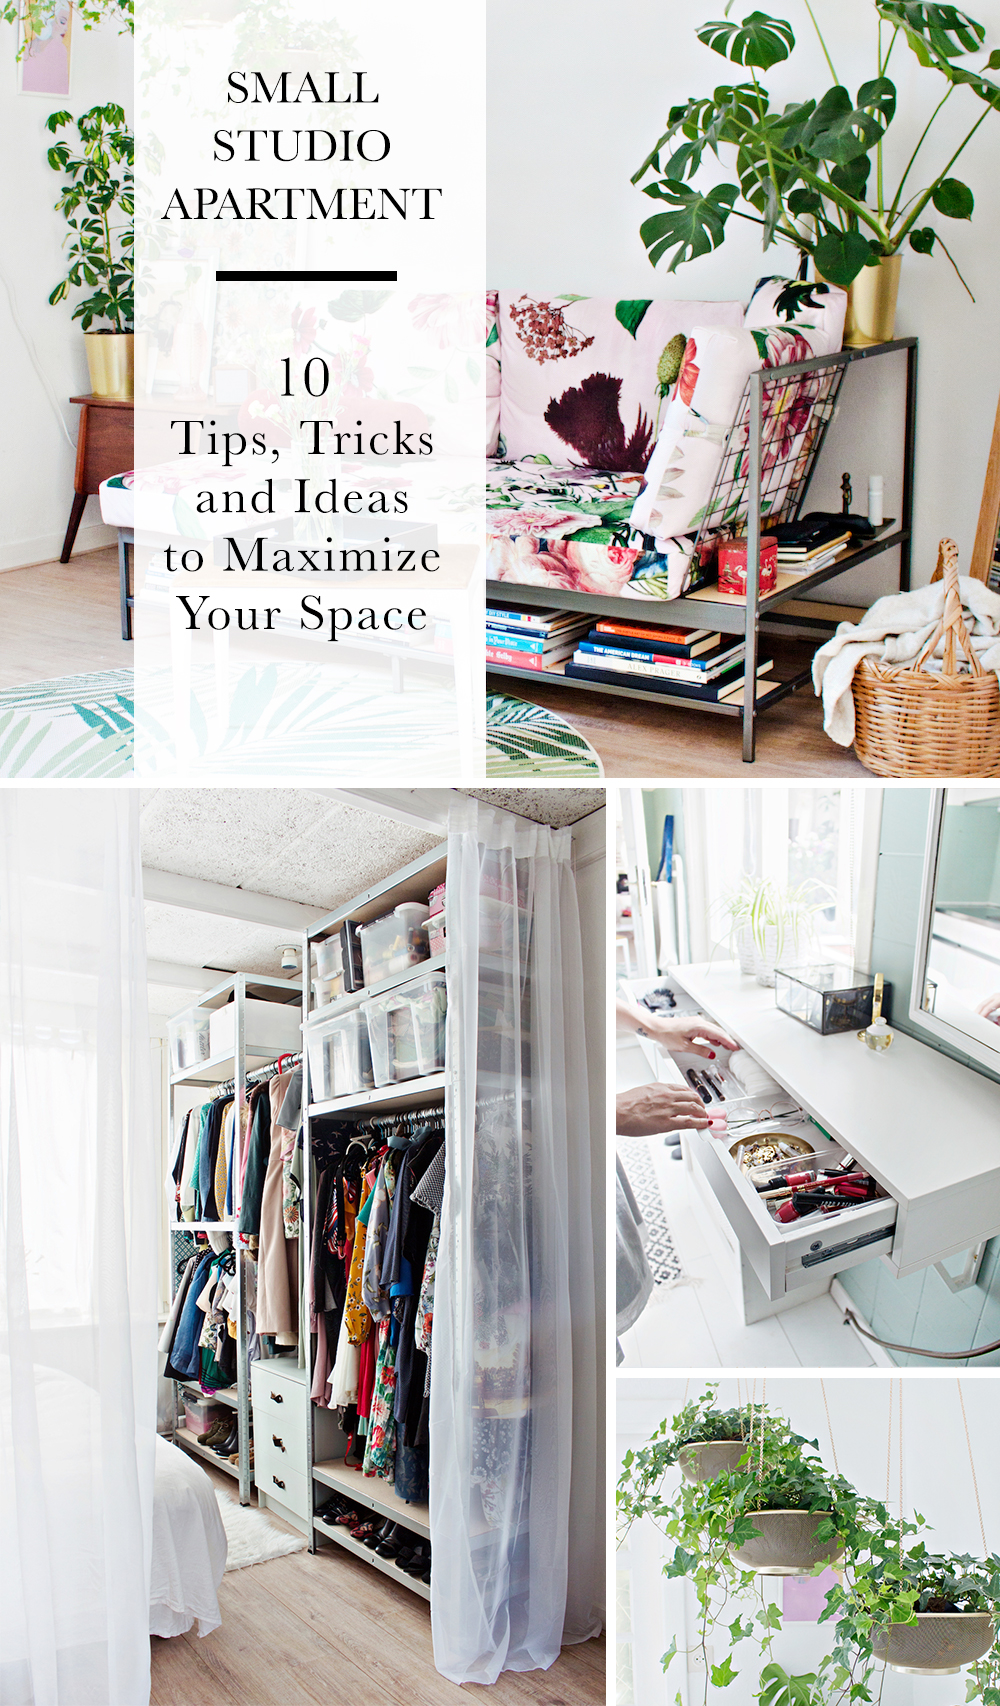 https://www.lanaredstudio.com/wp-content/uploads/2018/08/SMALL-STUDIO-APARTMENT-_-10-Tips-Tricks-and-Ideas-to-Maximize-Your-Space-.jpg